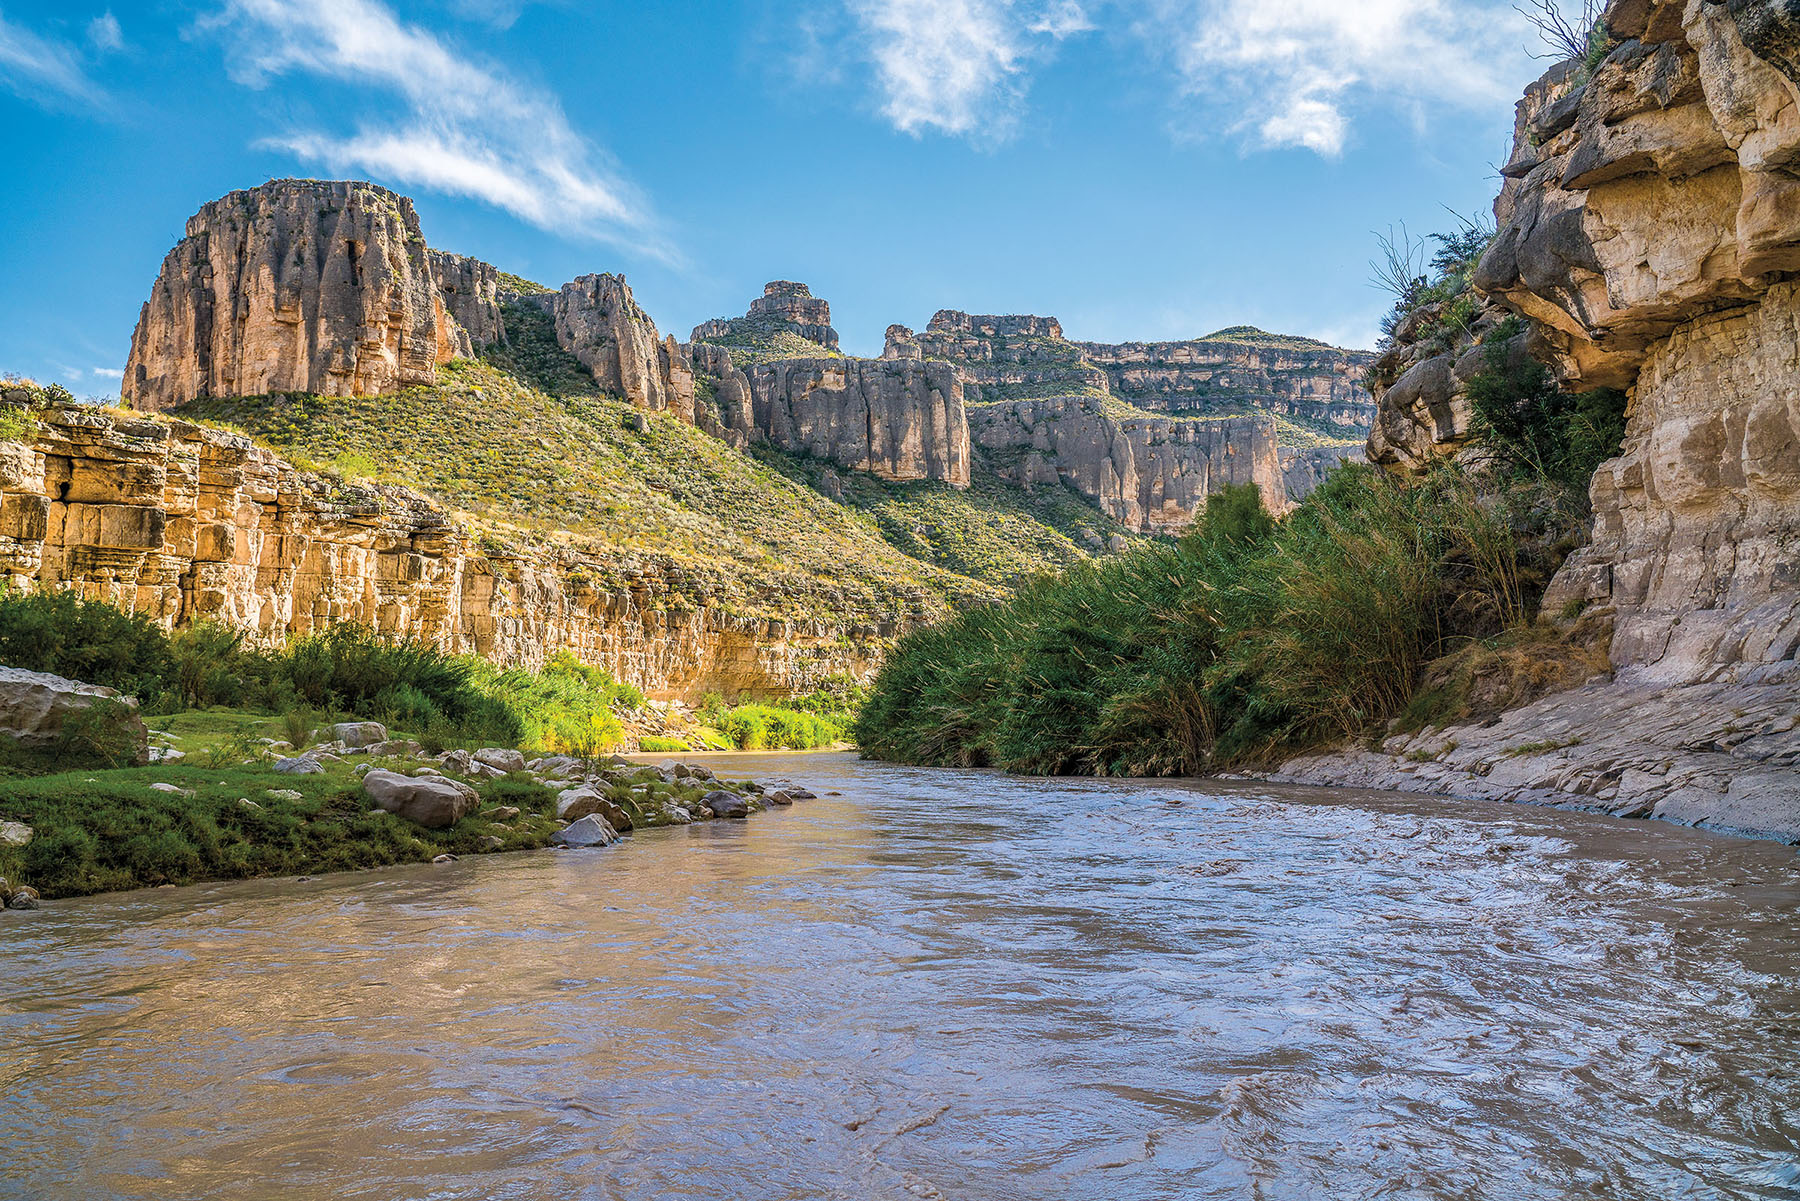 The Rio Grande weaves through a remote section of canyons in Texas